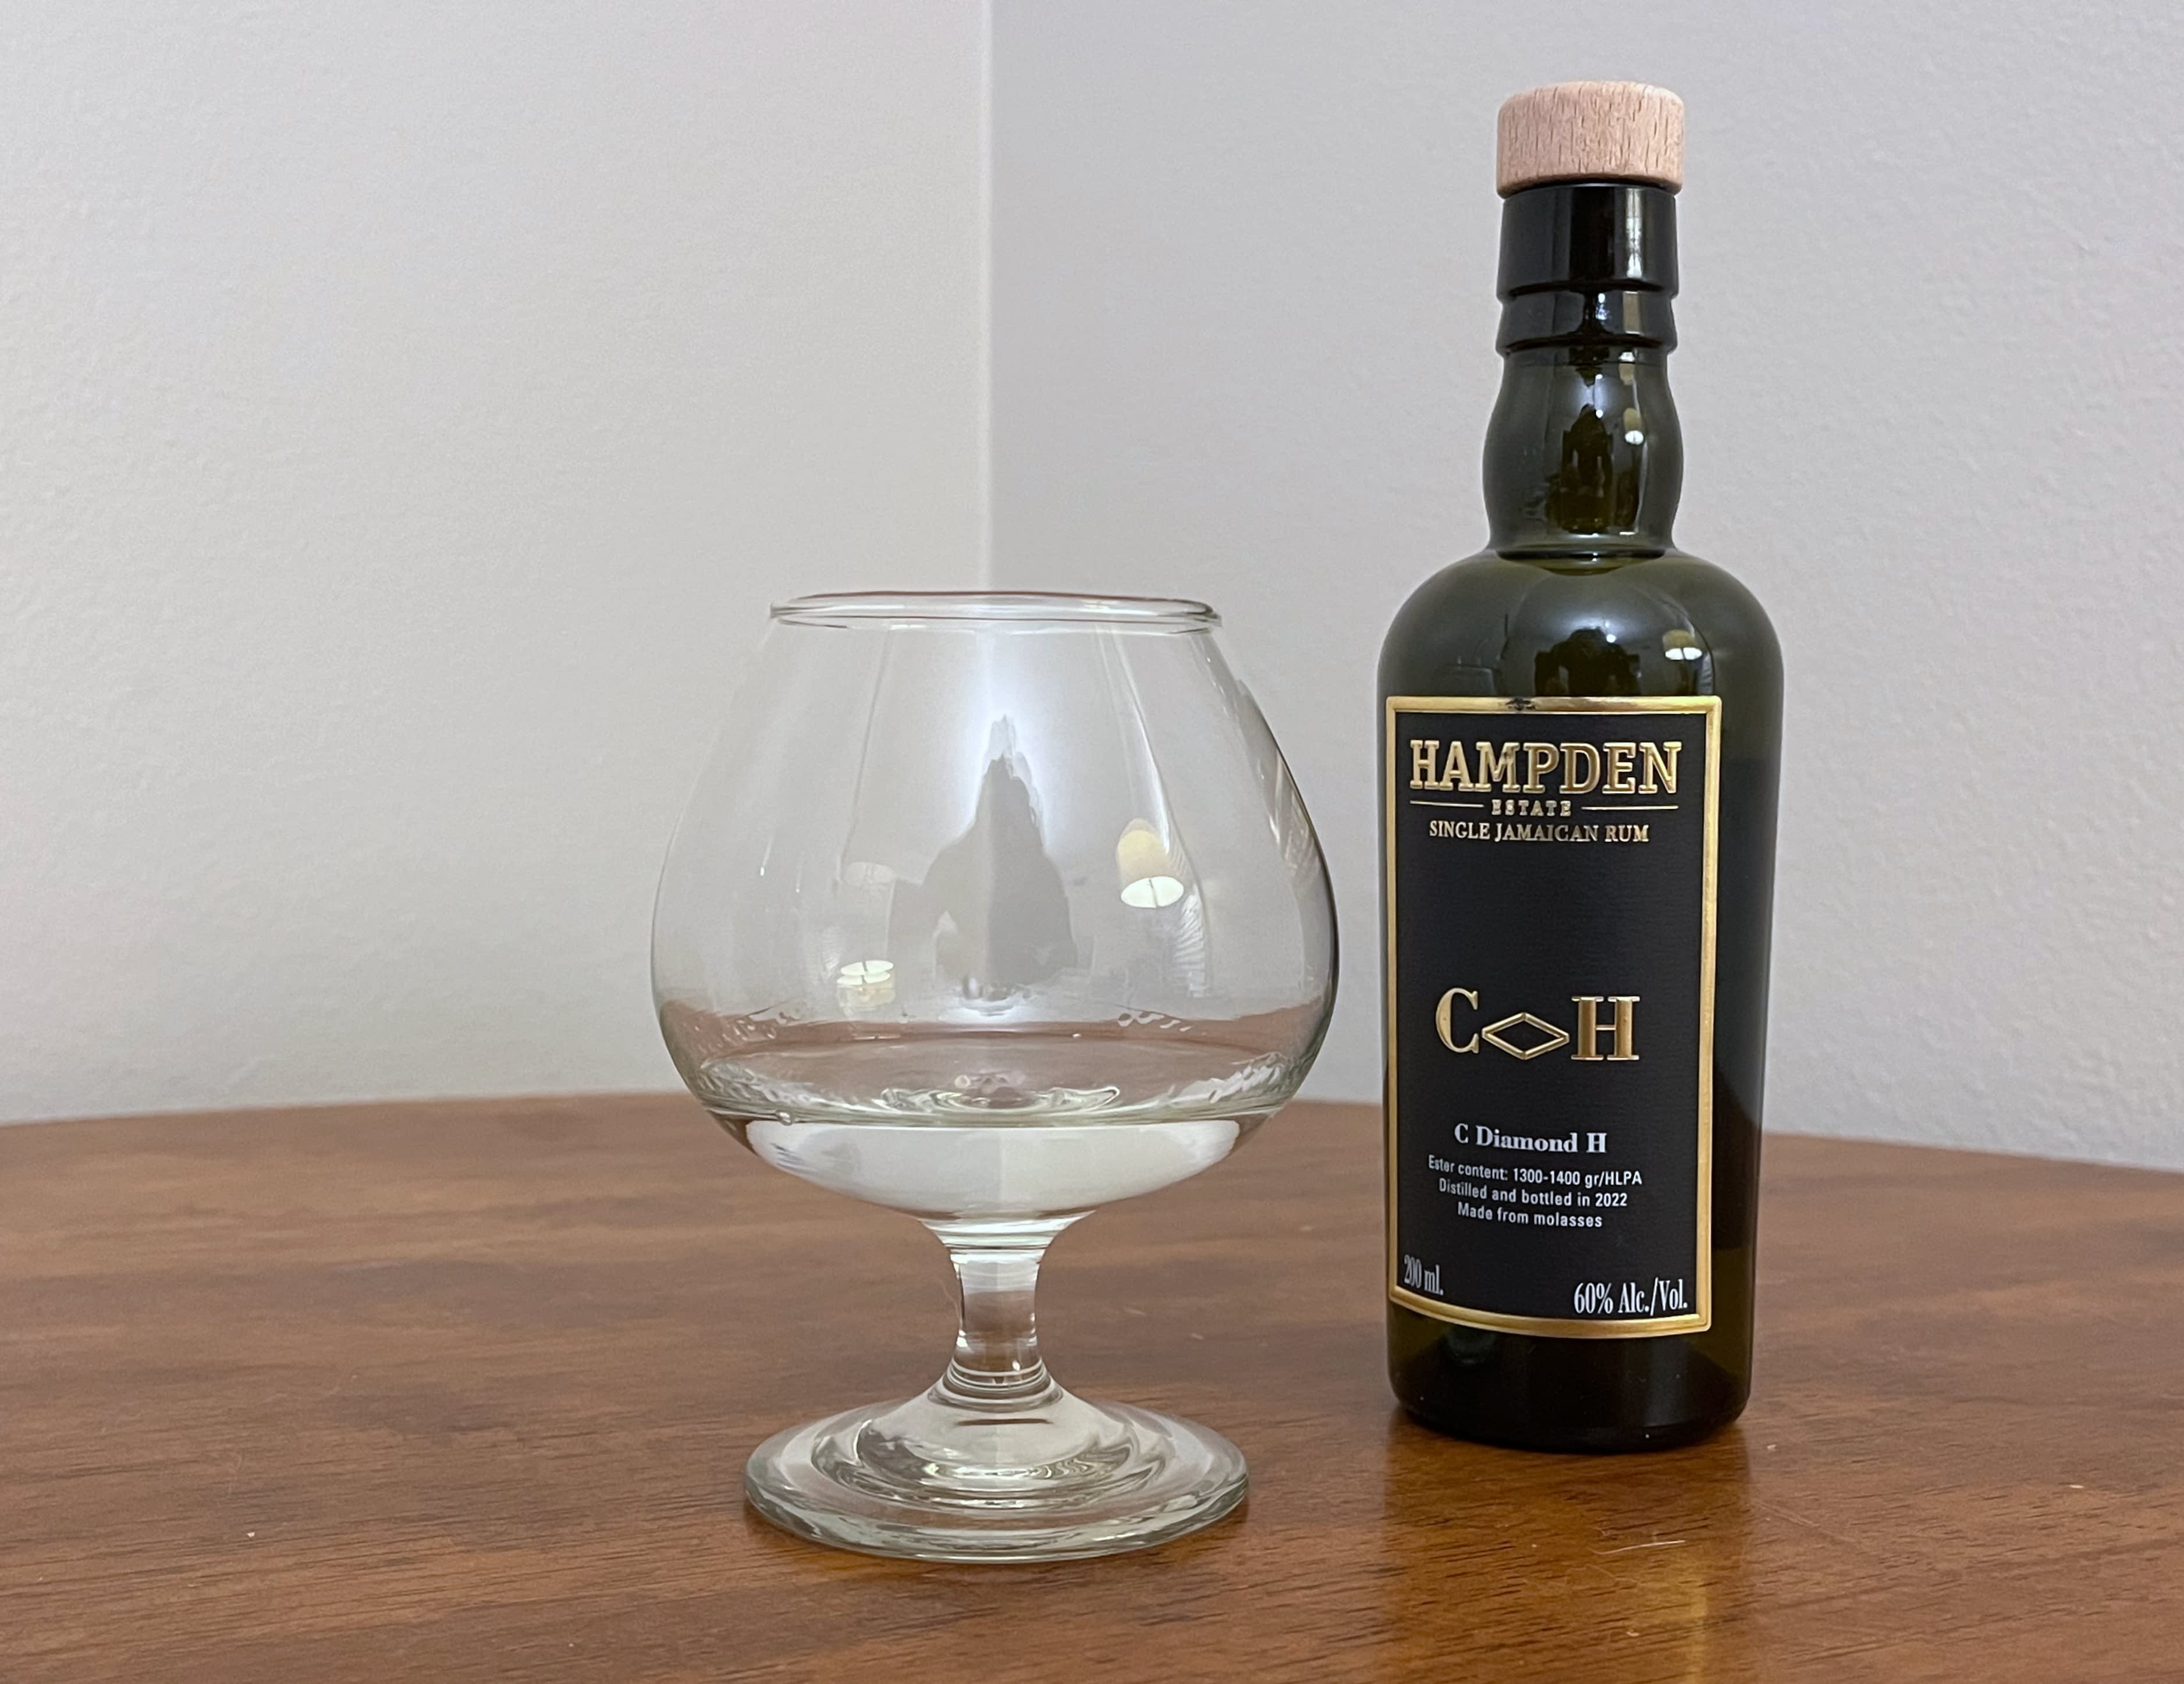 A bottle of Hampden 8 Marks C<>H next to a glass of rum